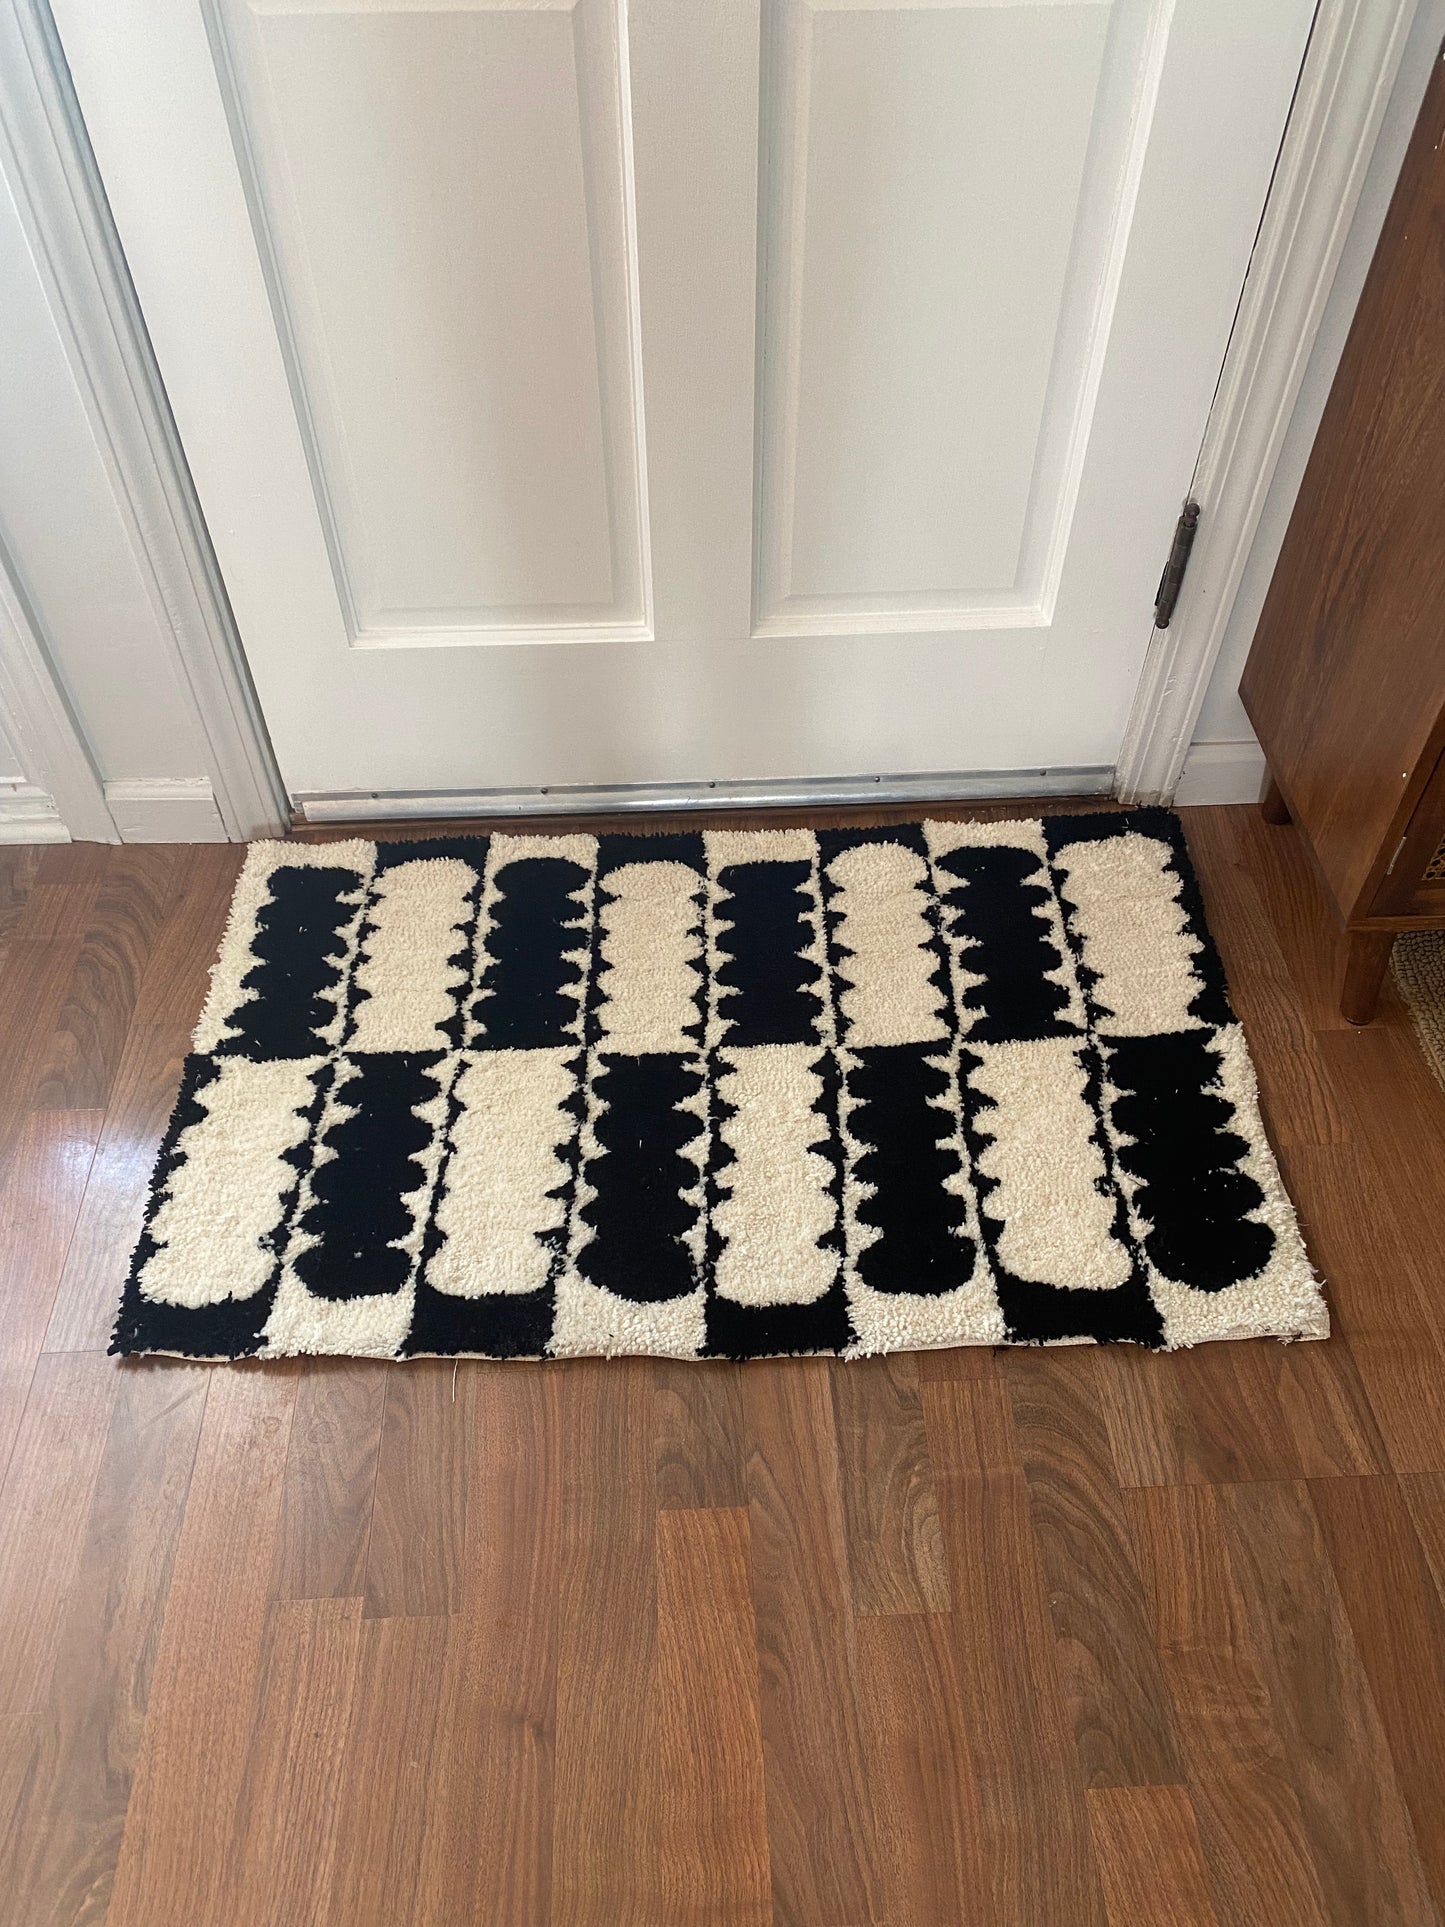 "Mid-Century" 2'x4' Accent Tufted Rug in Black and White